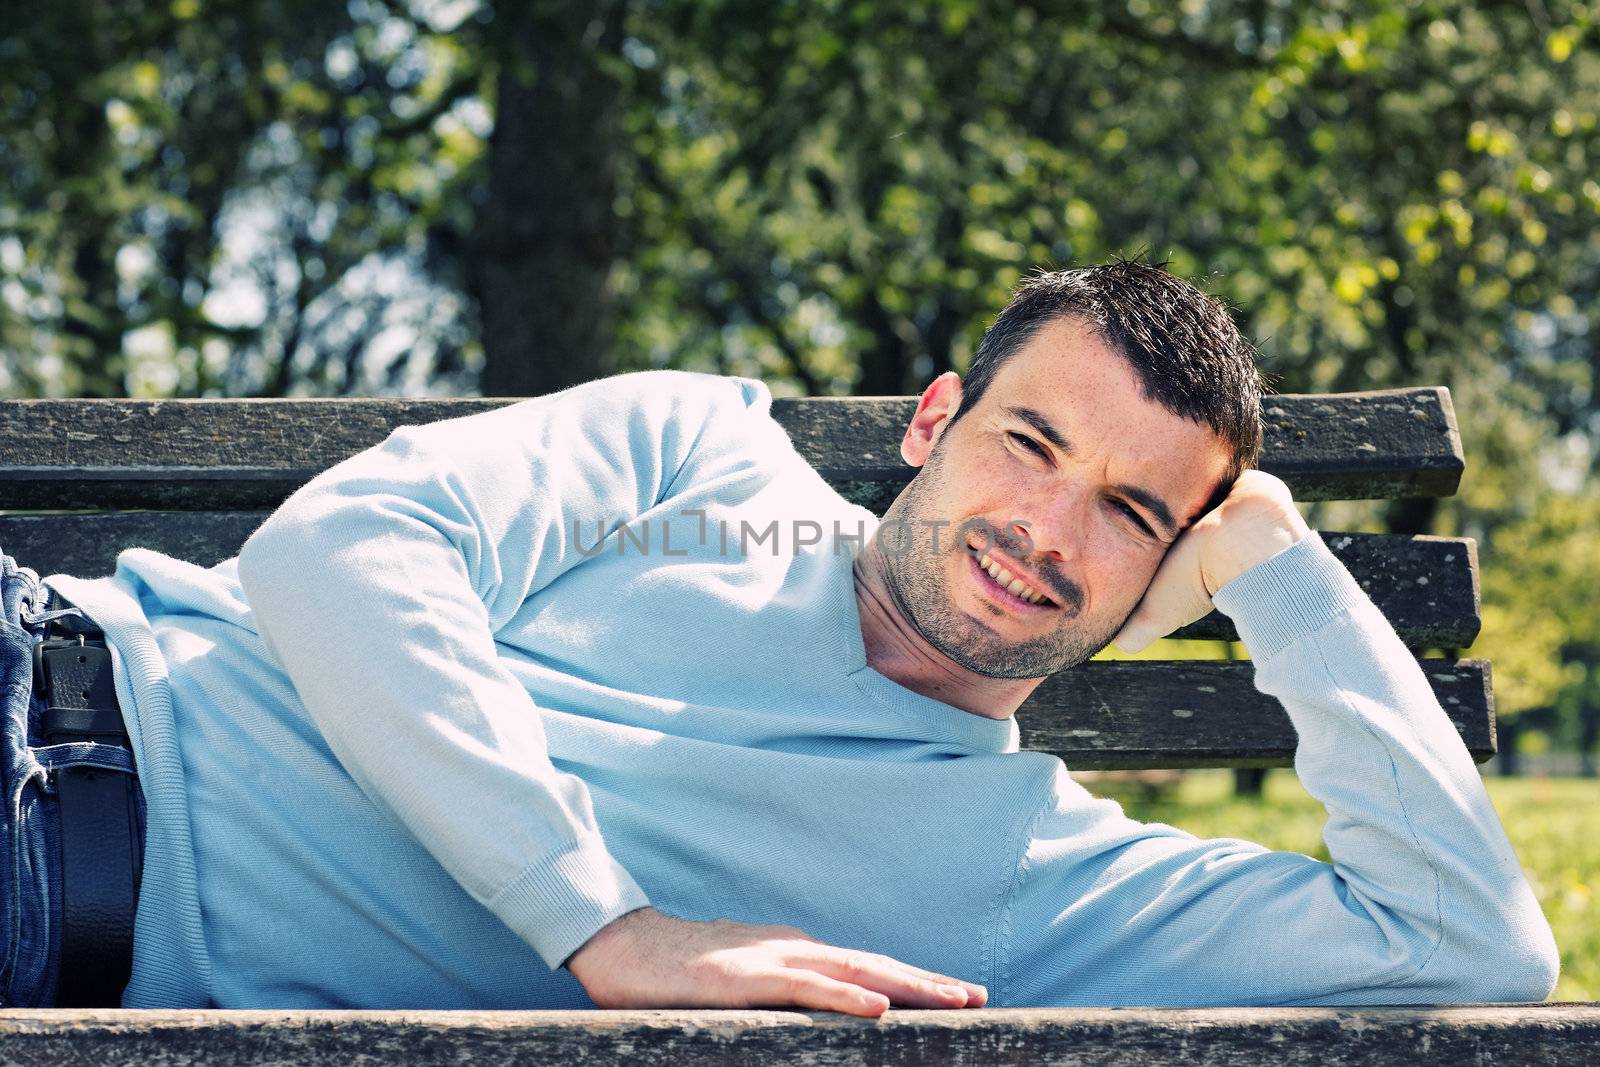 relaxed handsome man on a bench in a park